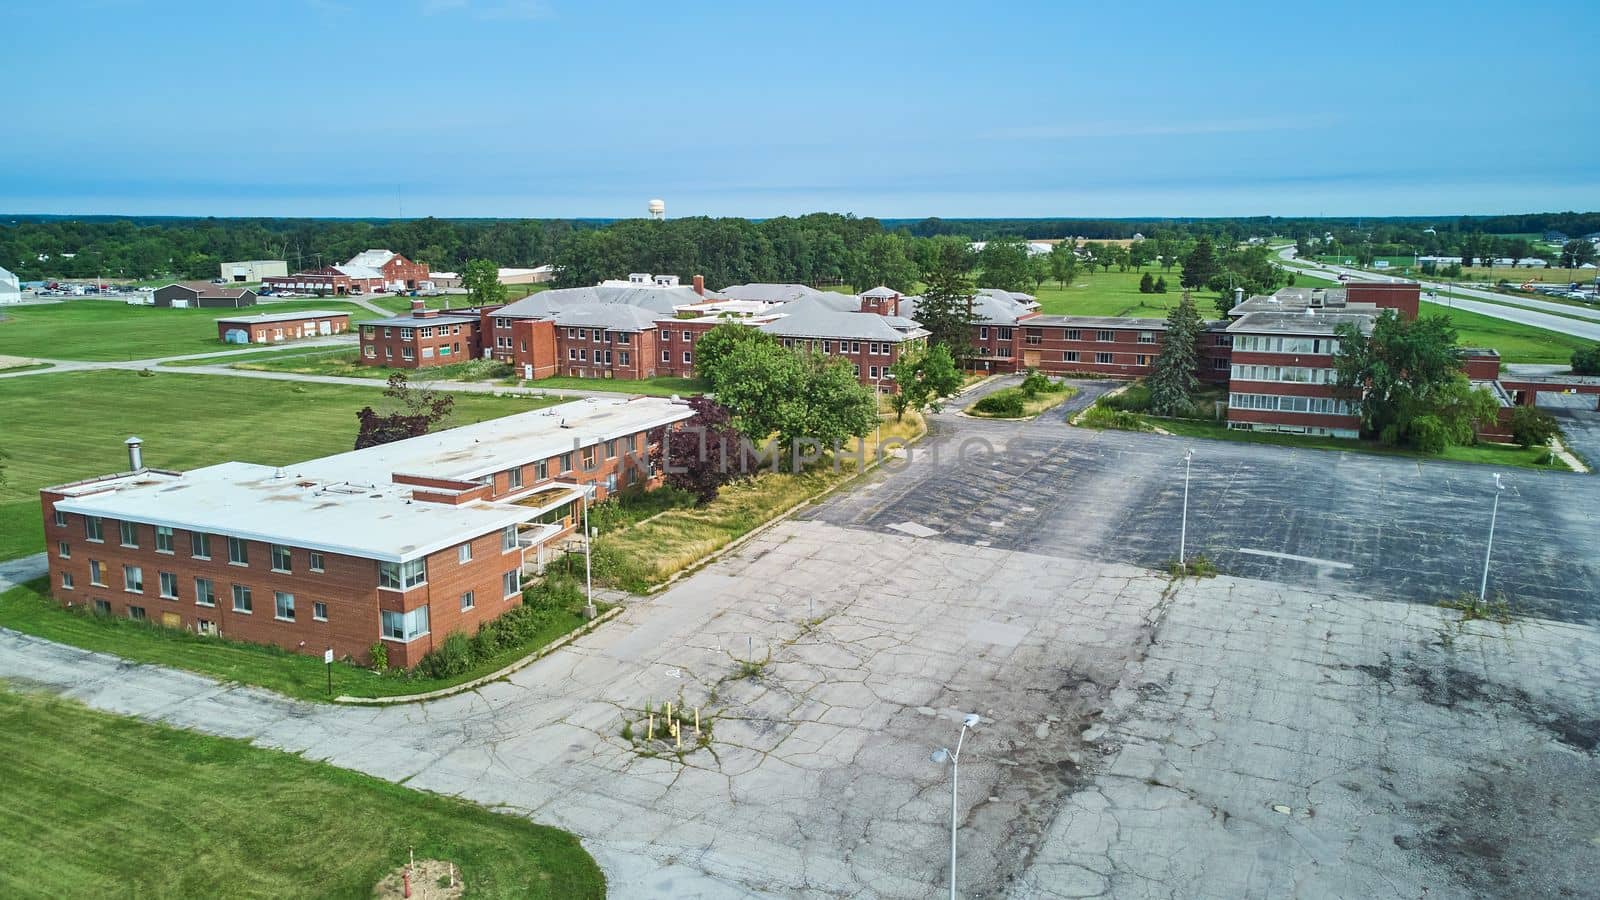 Aerial over huge abandoned brick hospital in Indiana by njproductions